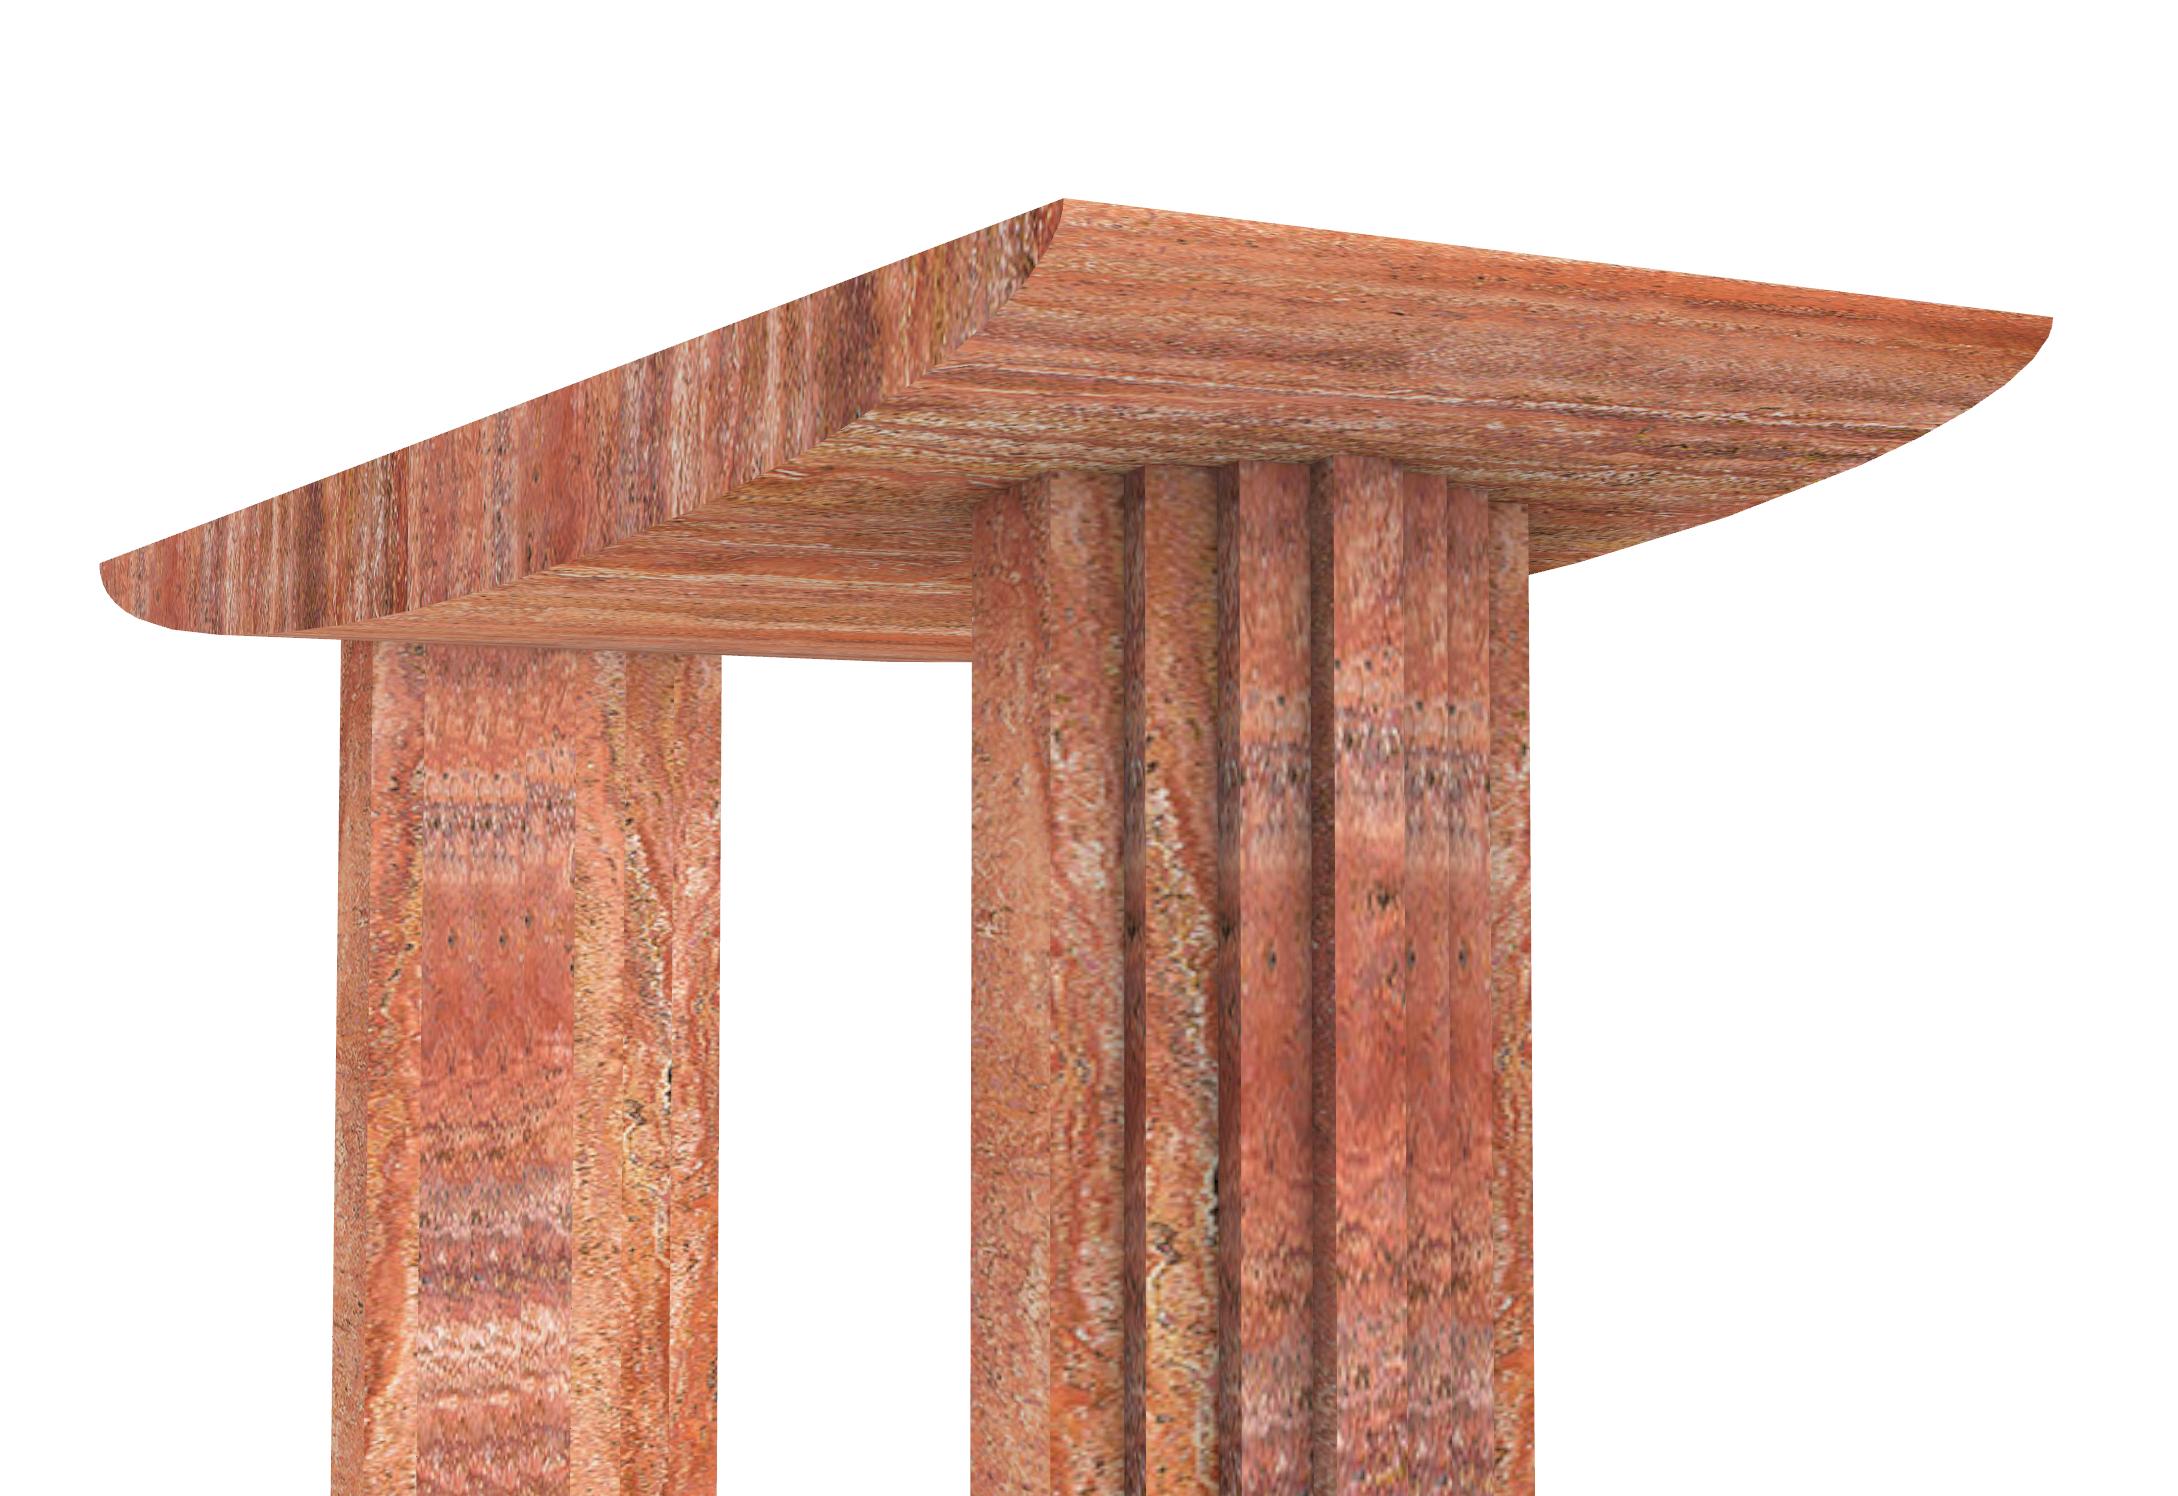 Bulgarian Sculptural Console table 0024c in Red Travertine stone by artist Desia Ava For Sale